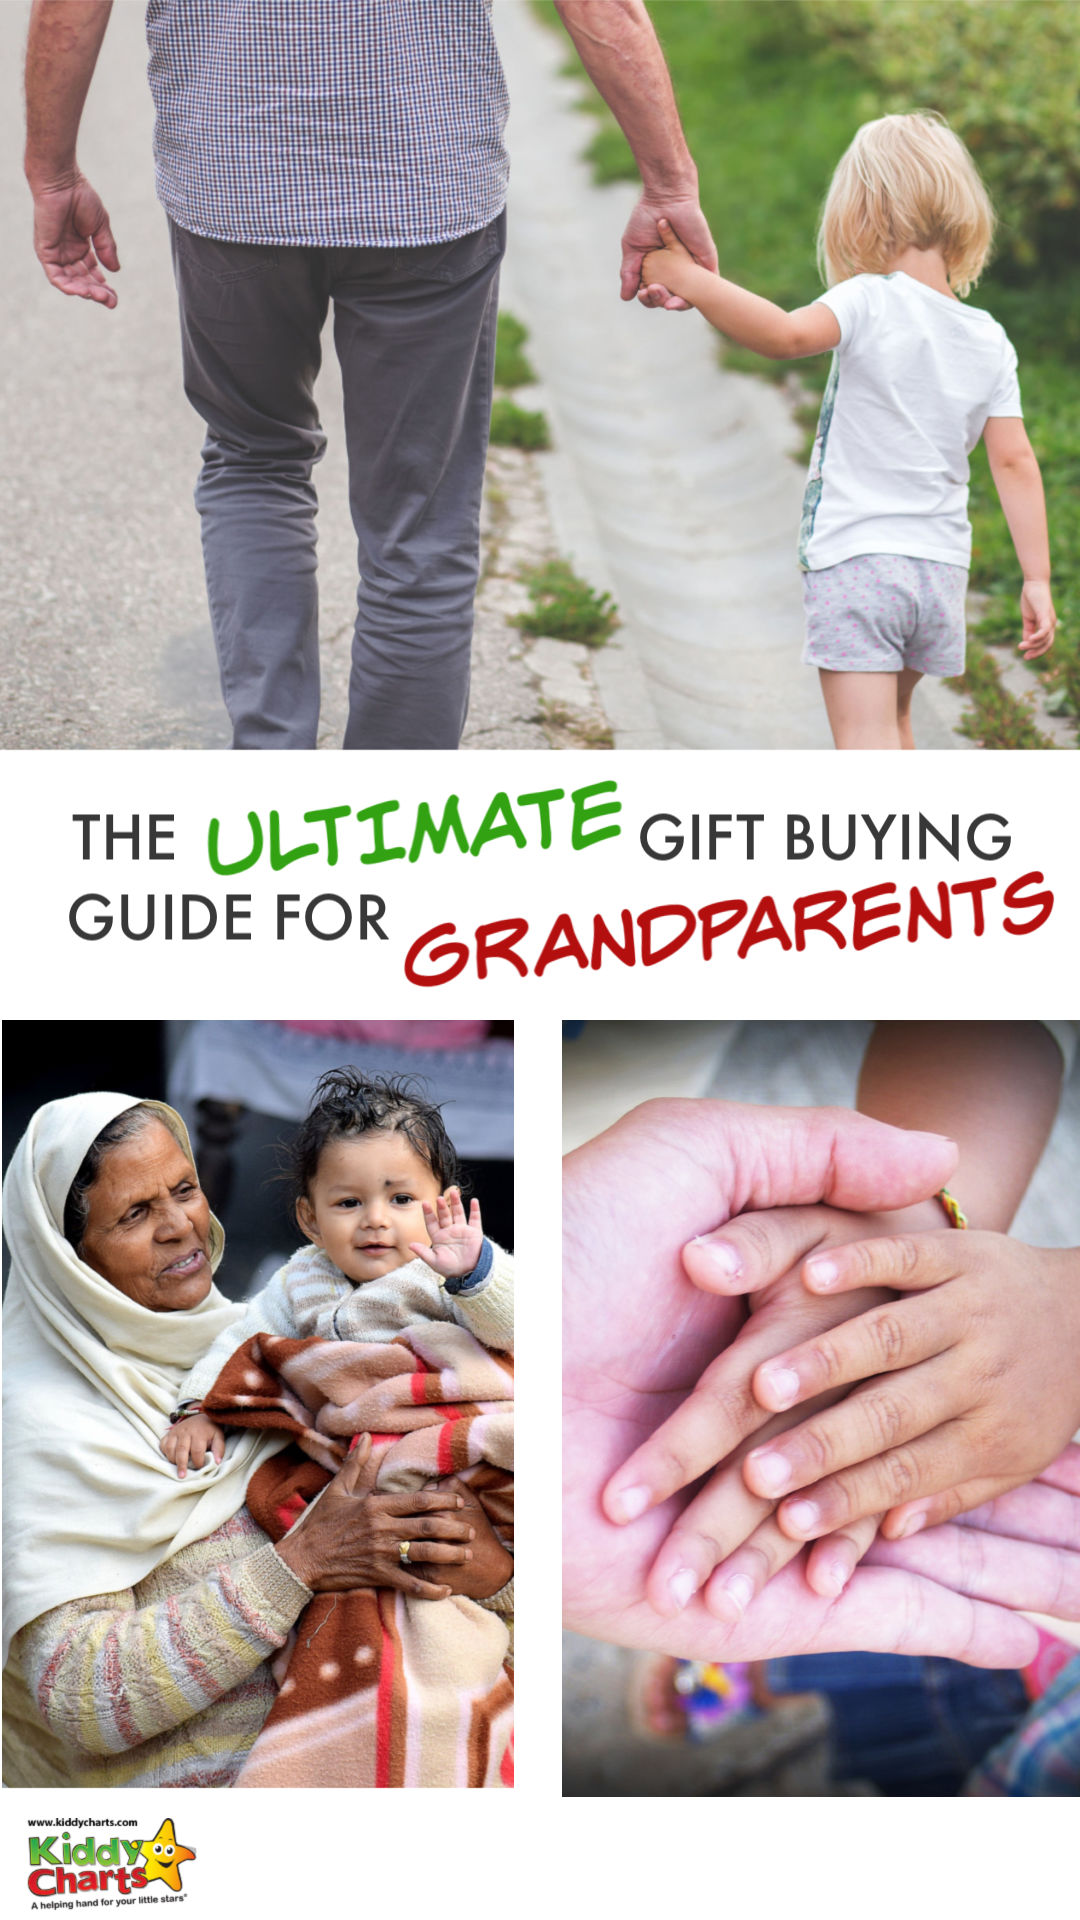 Looking for a gift for the Grankids, then we've got you covered! Check out our ultimate gift buying guide for grandparents everywhere! #grandparents #gifts #giftguides #presents #kids